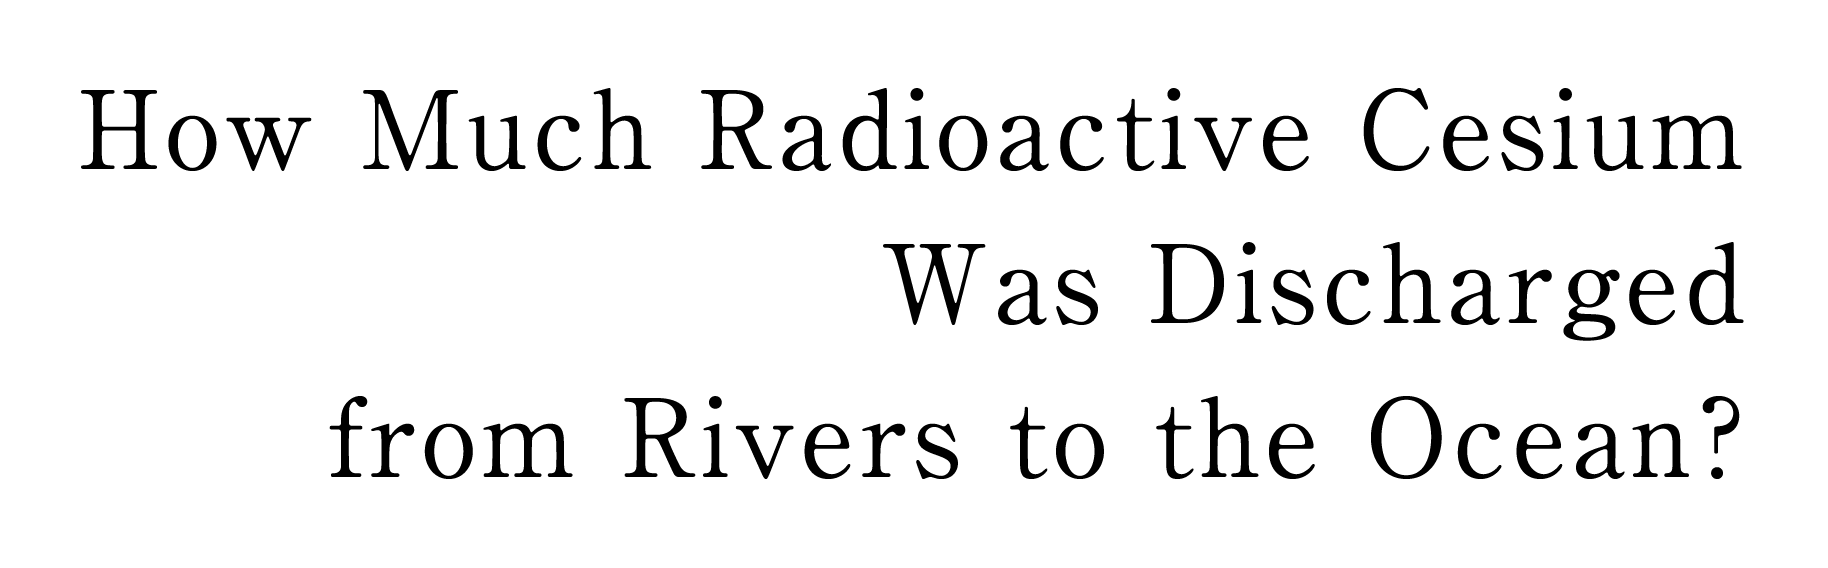 How Much Radioactive Cesium Was Discharged from Rivers to the Ocean?